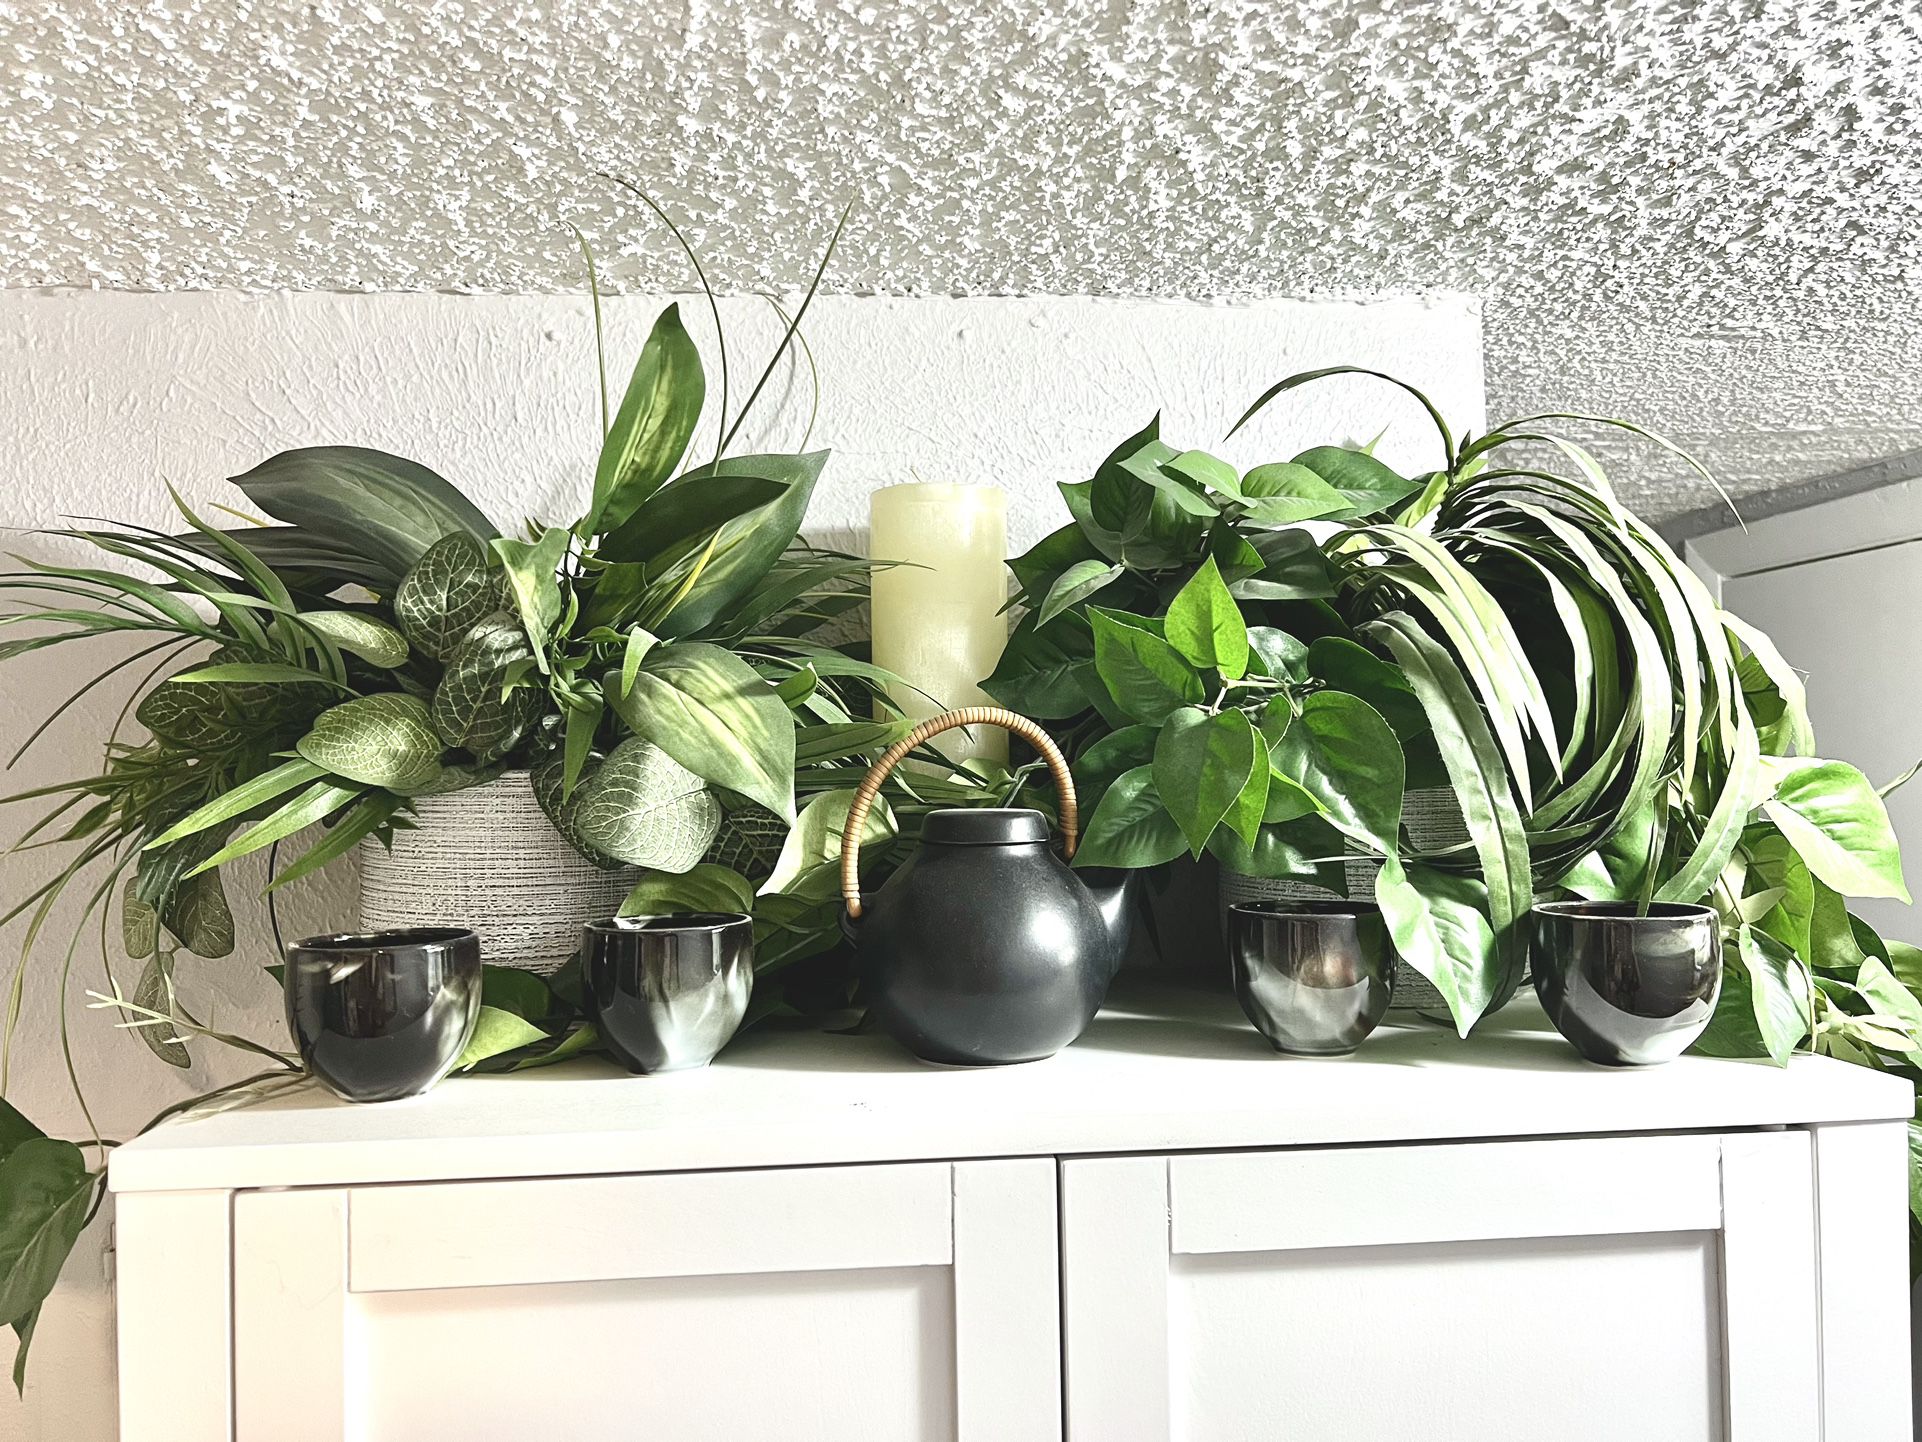 Great Condition: High Quality silk artificial plants, pots included, 4 plants total, 2 pots